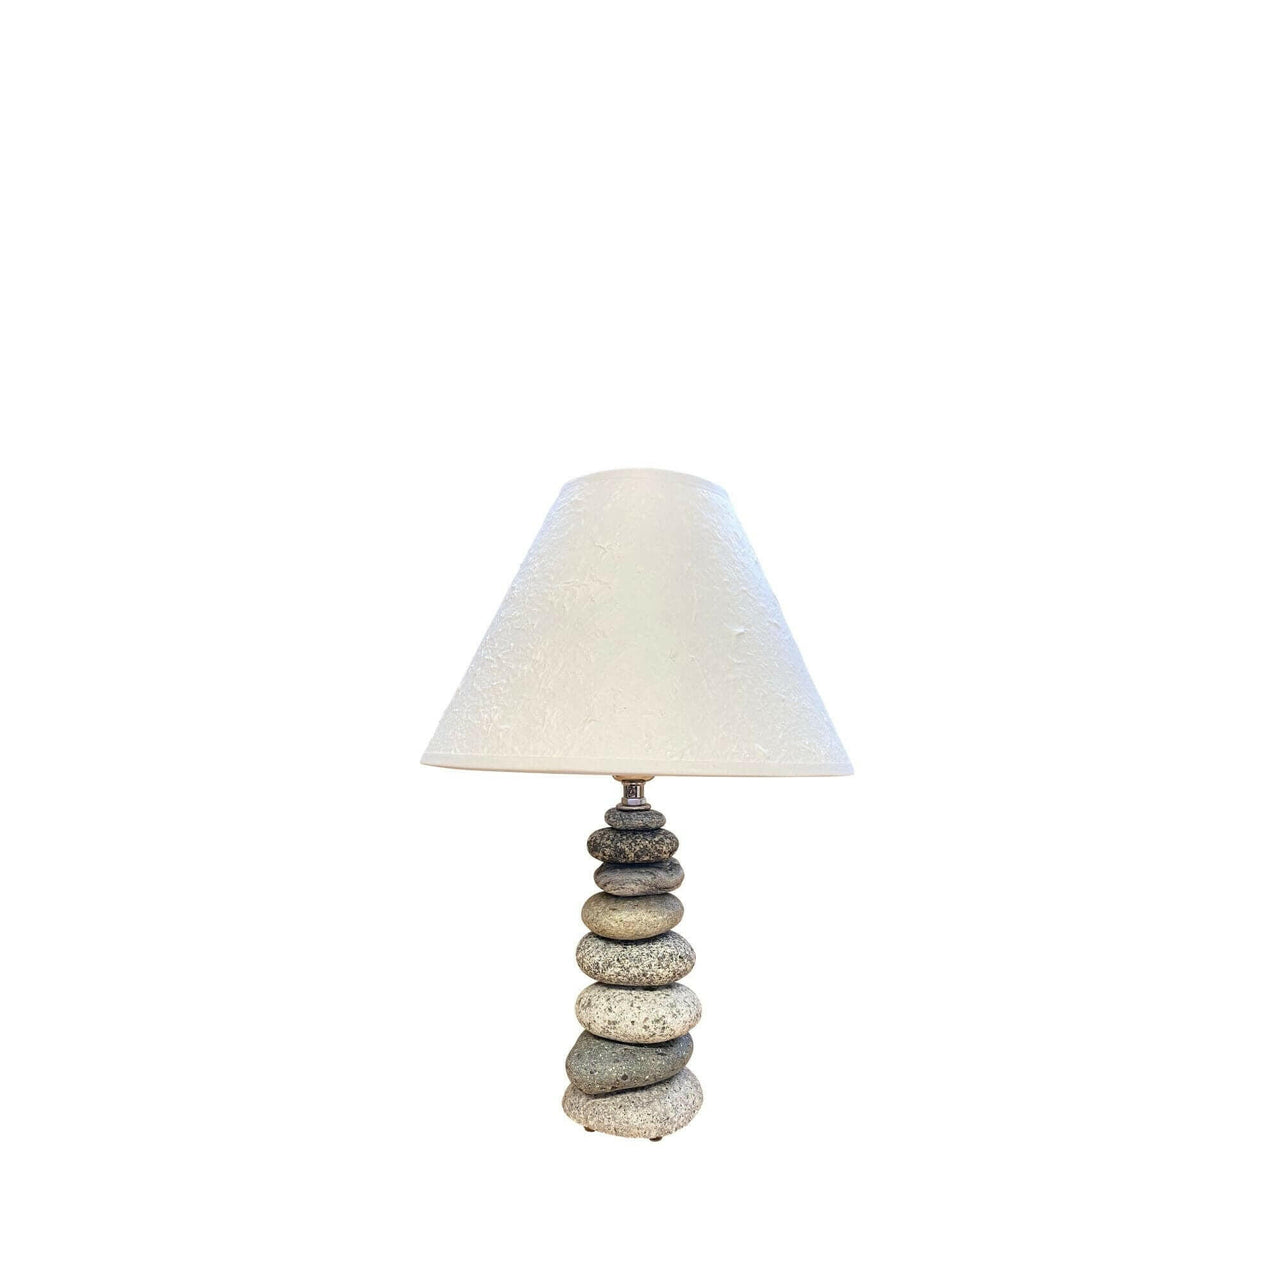 Stacked Stone Lamp, Handcrafted from Beach & River Rocks Lamps New England Trading Co 14" - 15" with shade  